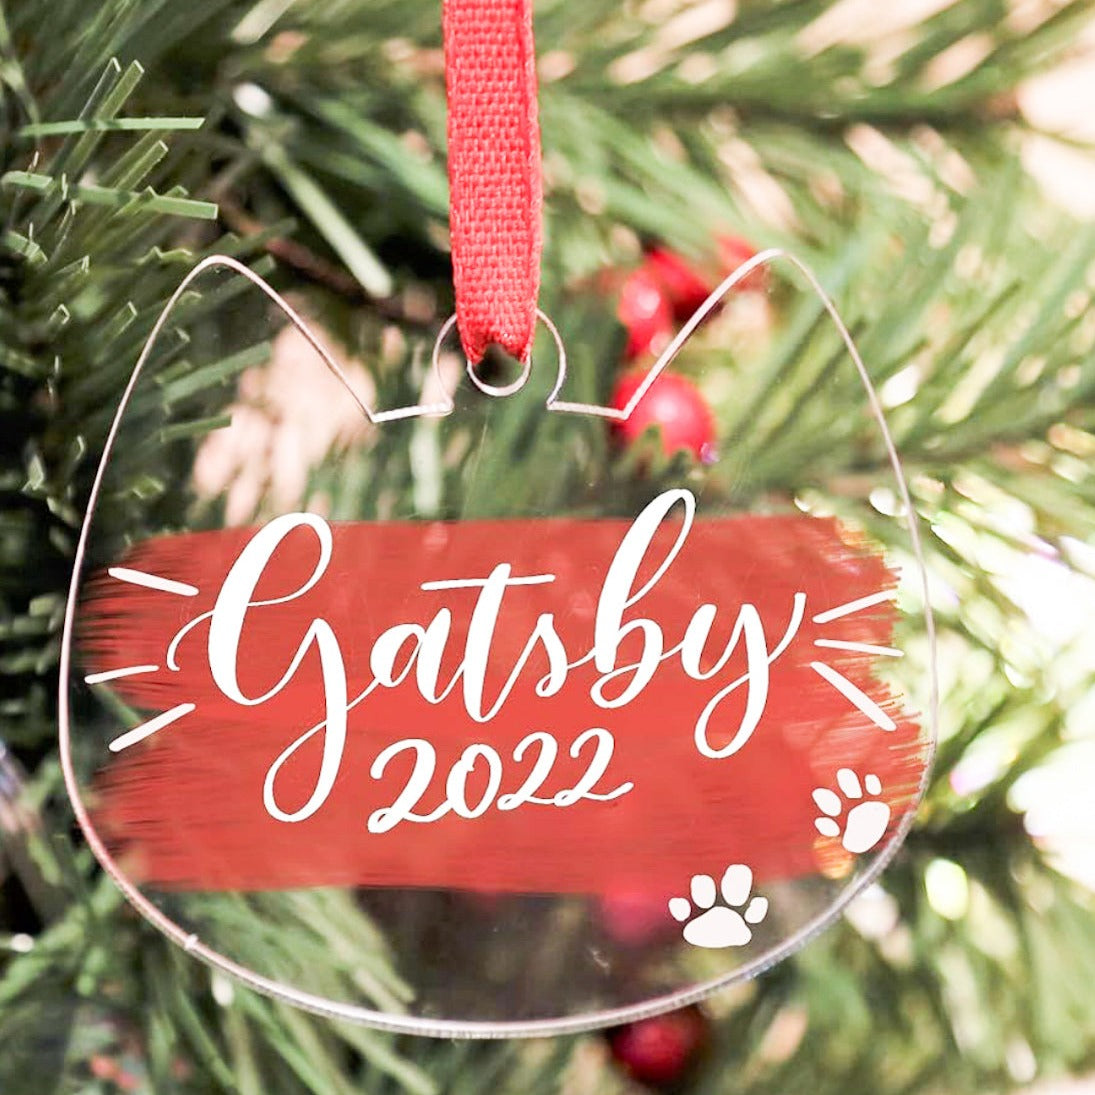 Personalized Acrylic Ornaments